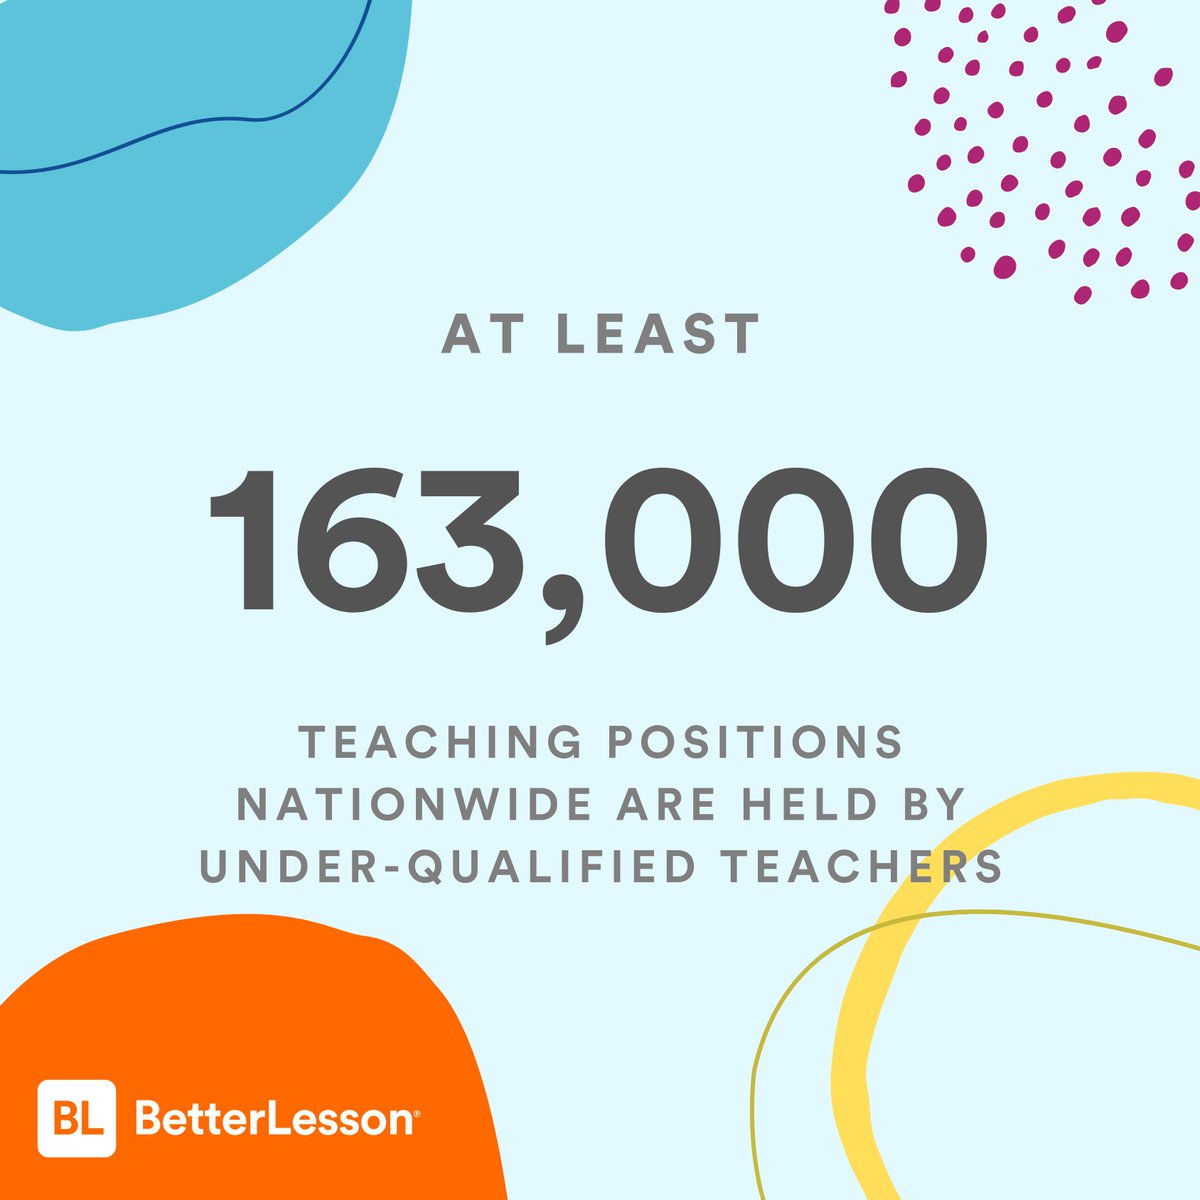 A recent study states that 163,000+ teaching positions are held by under-qualified teachers. This is a problem of supply-and-demand. If this hits close to home, join our webinar to discuss recruitment strategies for K-12 principals: bit.ly/42PPcsk

#teachershortage